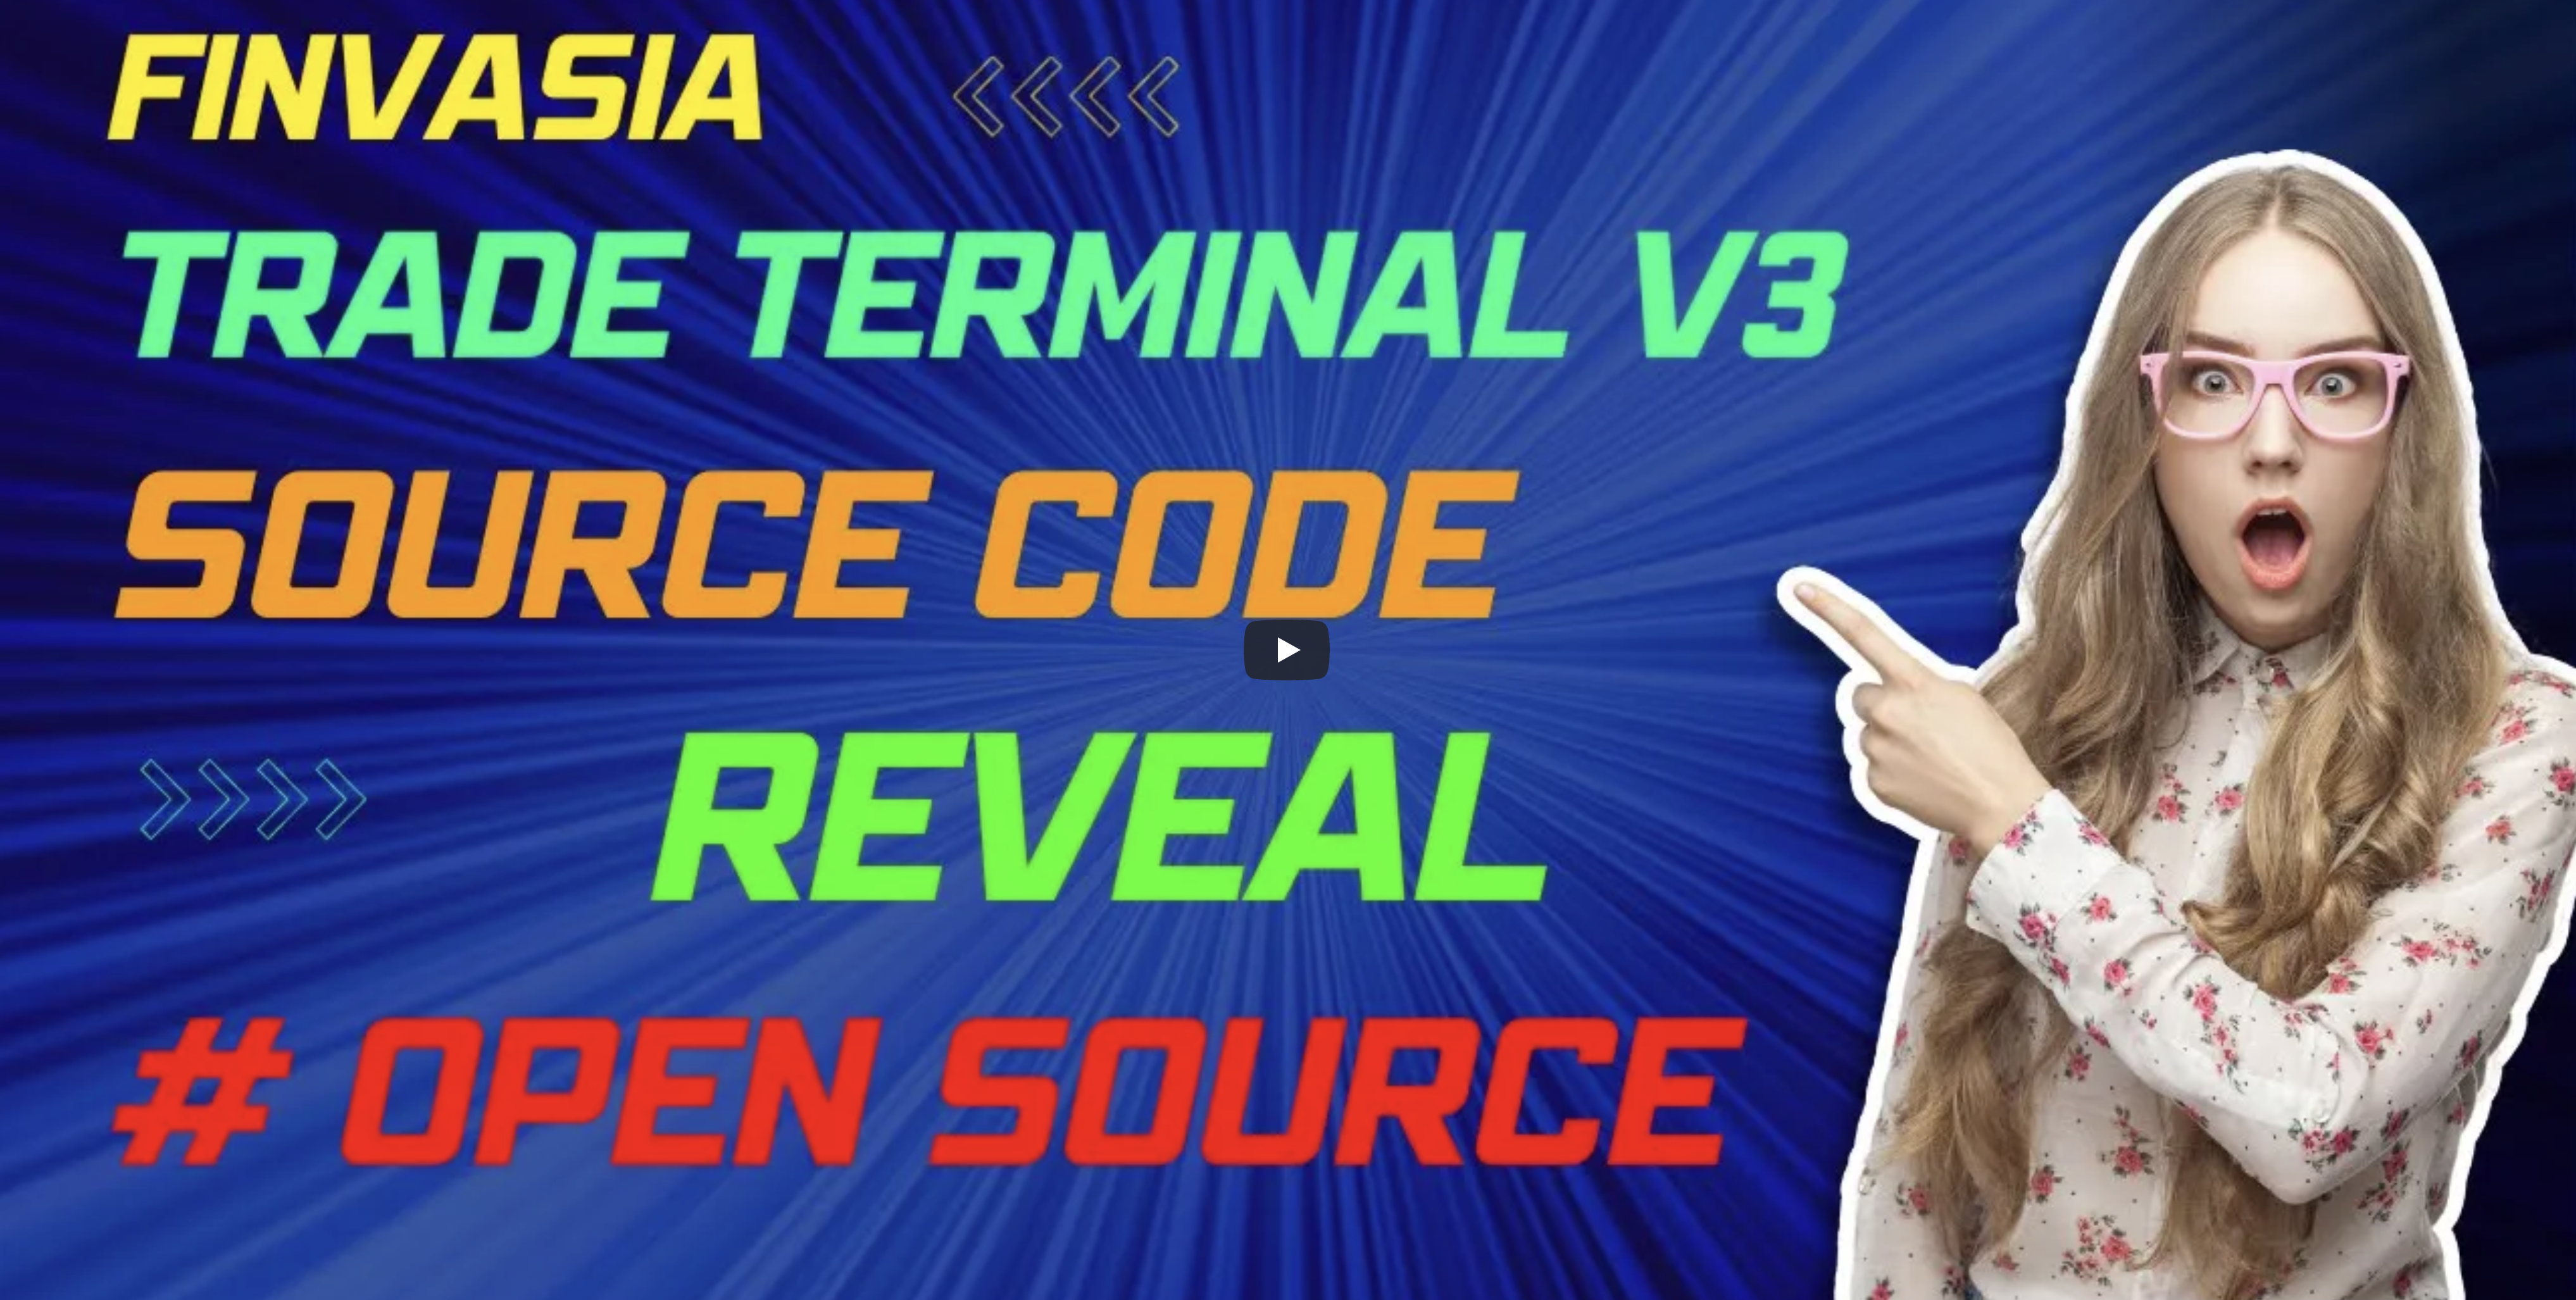 Watch the finvasia trade terminal v3 source code reveal video